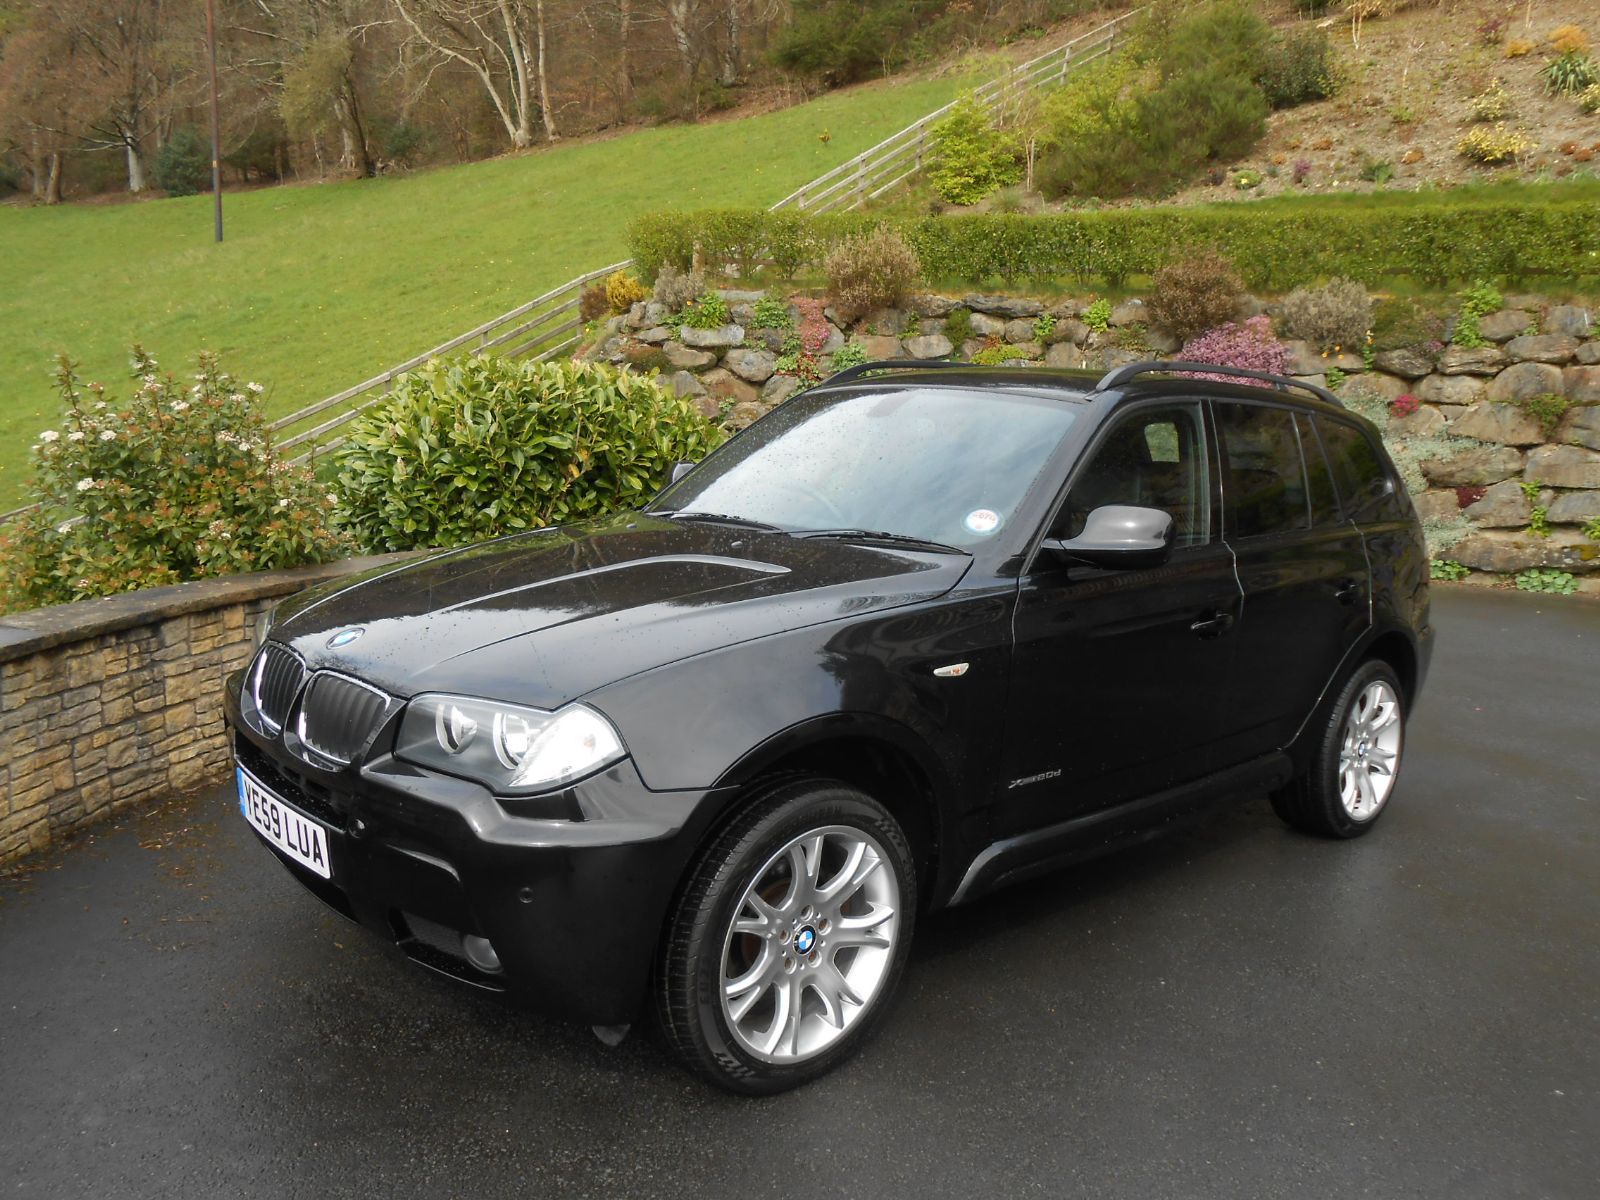 Bmw cars for sale in wales #7